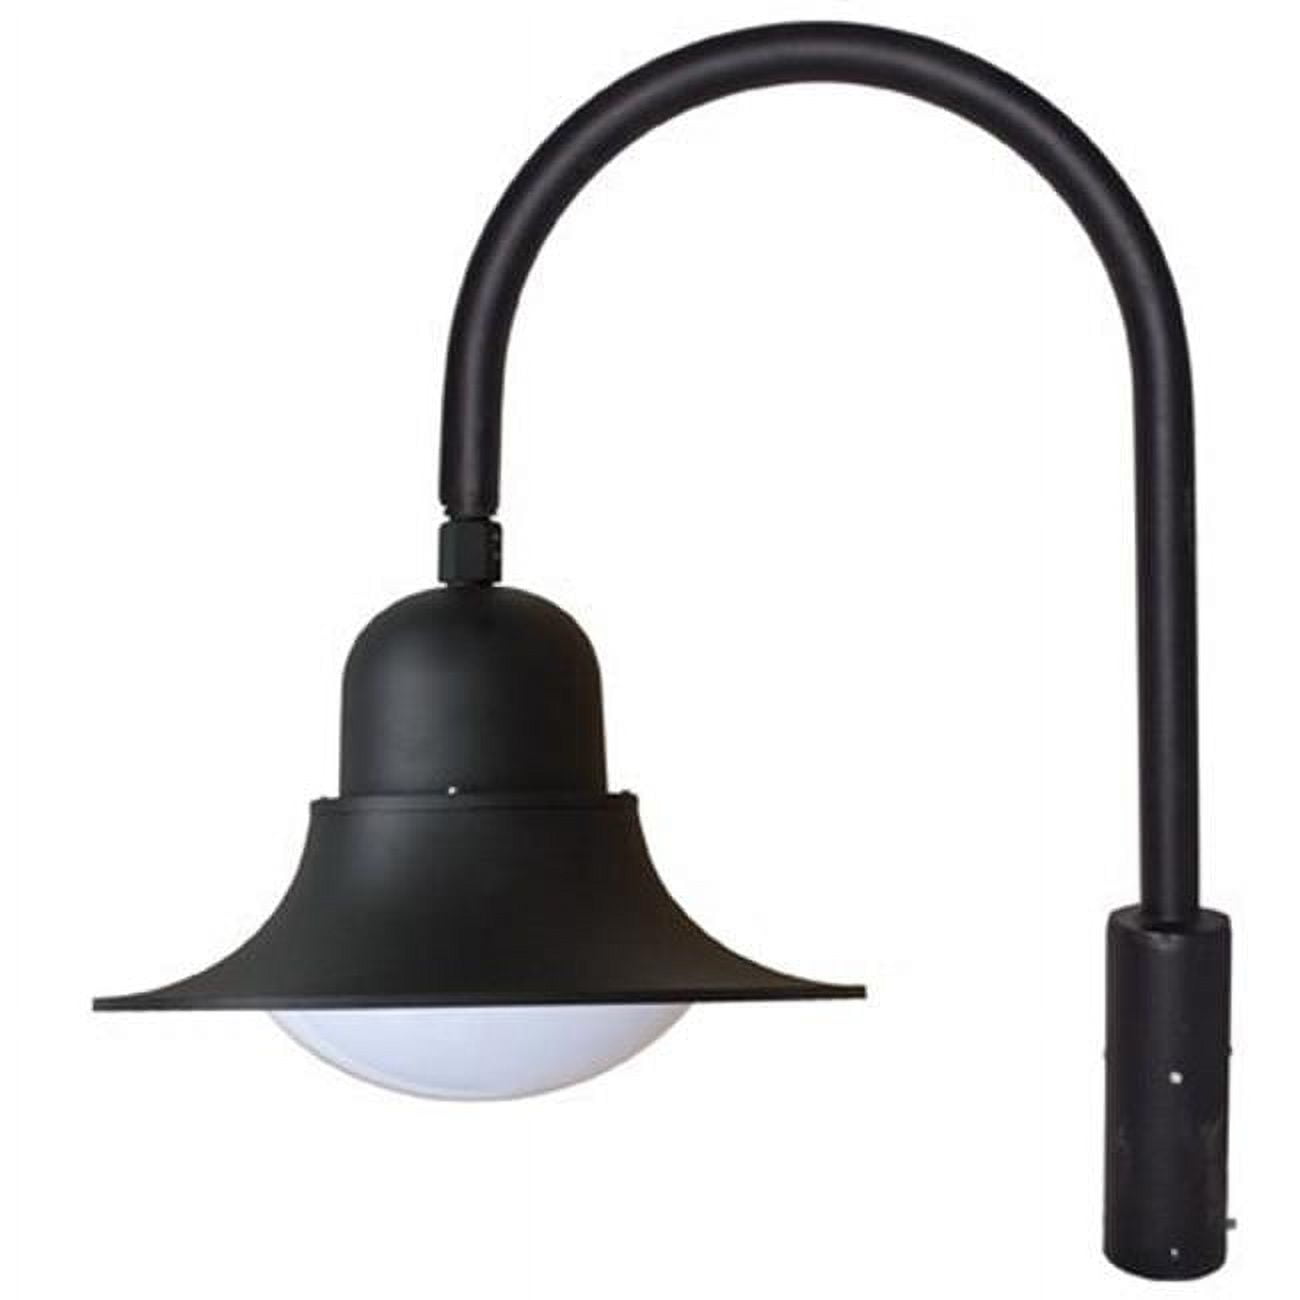 Picture of Dabmar Lighting GM616-B 50W 120V Powder Coated Cast Aluminum Post Top Light Fixture with Metal Halide Lamp, Black - 35.50 x 22 x 30.92 in.